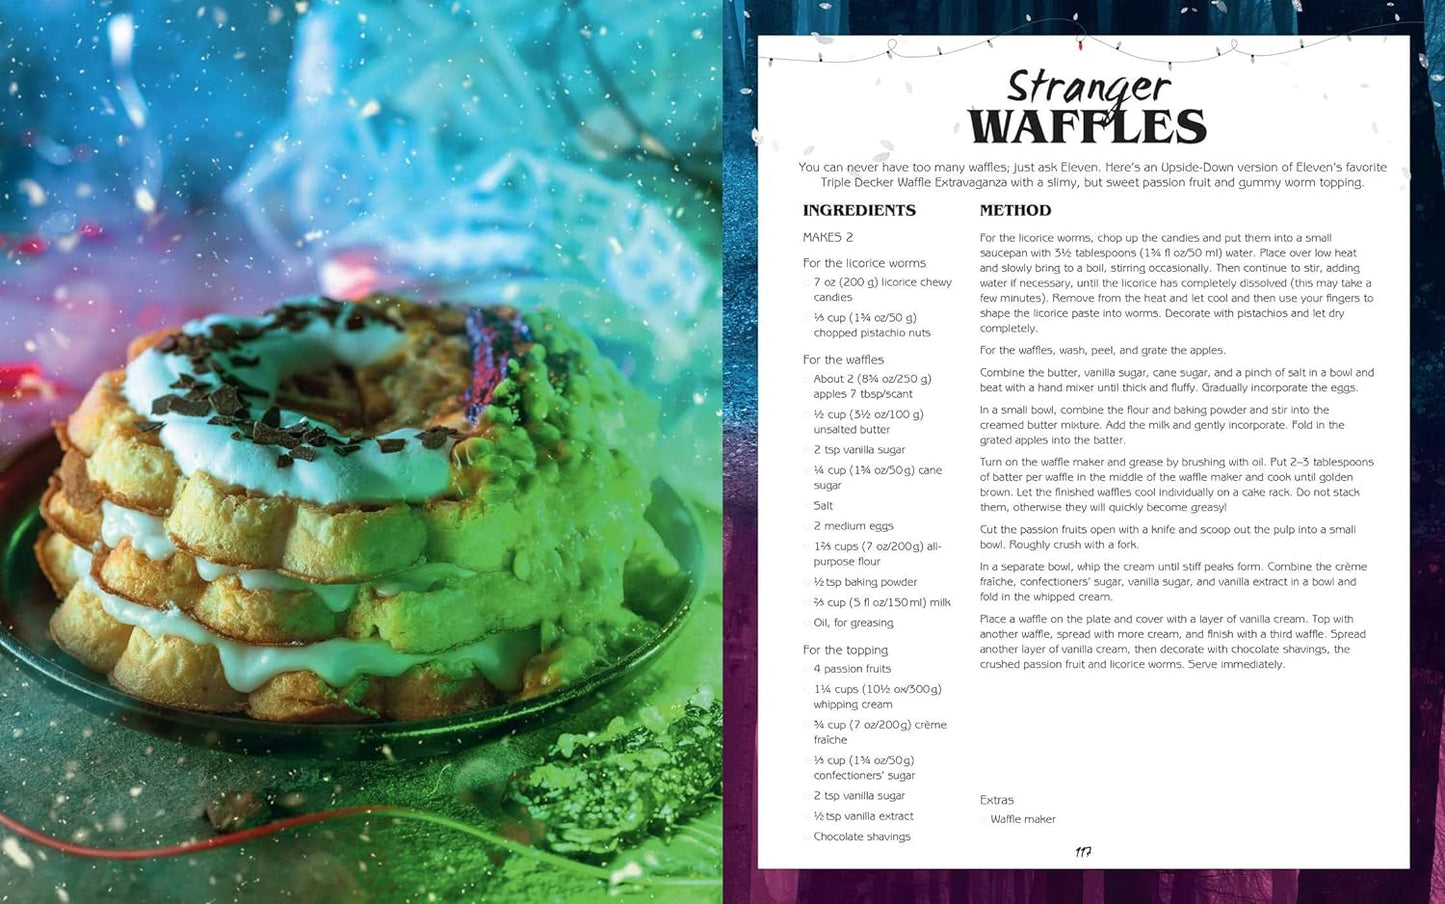 A two-page spread from the book. On the left is a plate of waffles with whipped cream, chocolate chips, and other sweet toppings, on a table. Behind the waffles are blue and green lights. On the right is a recipe for stranger waffles.